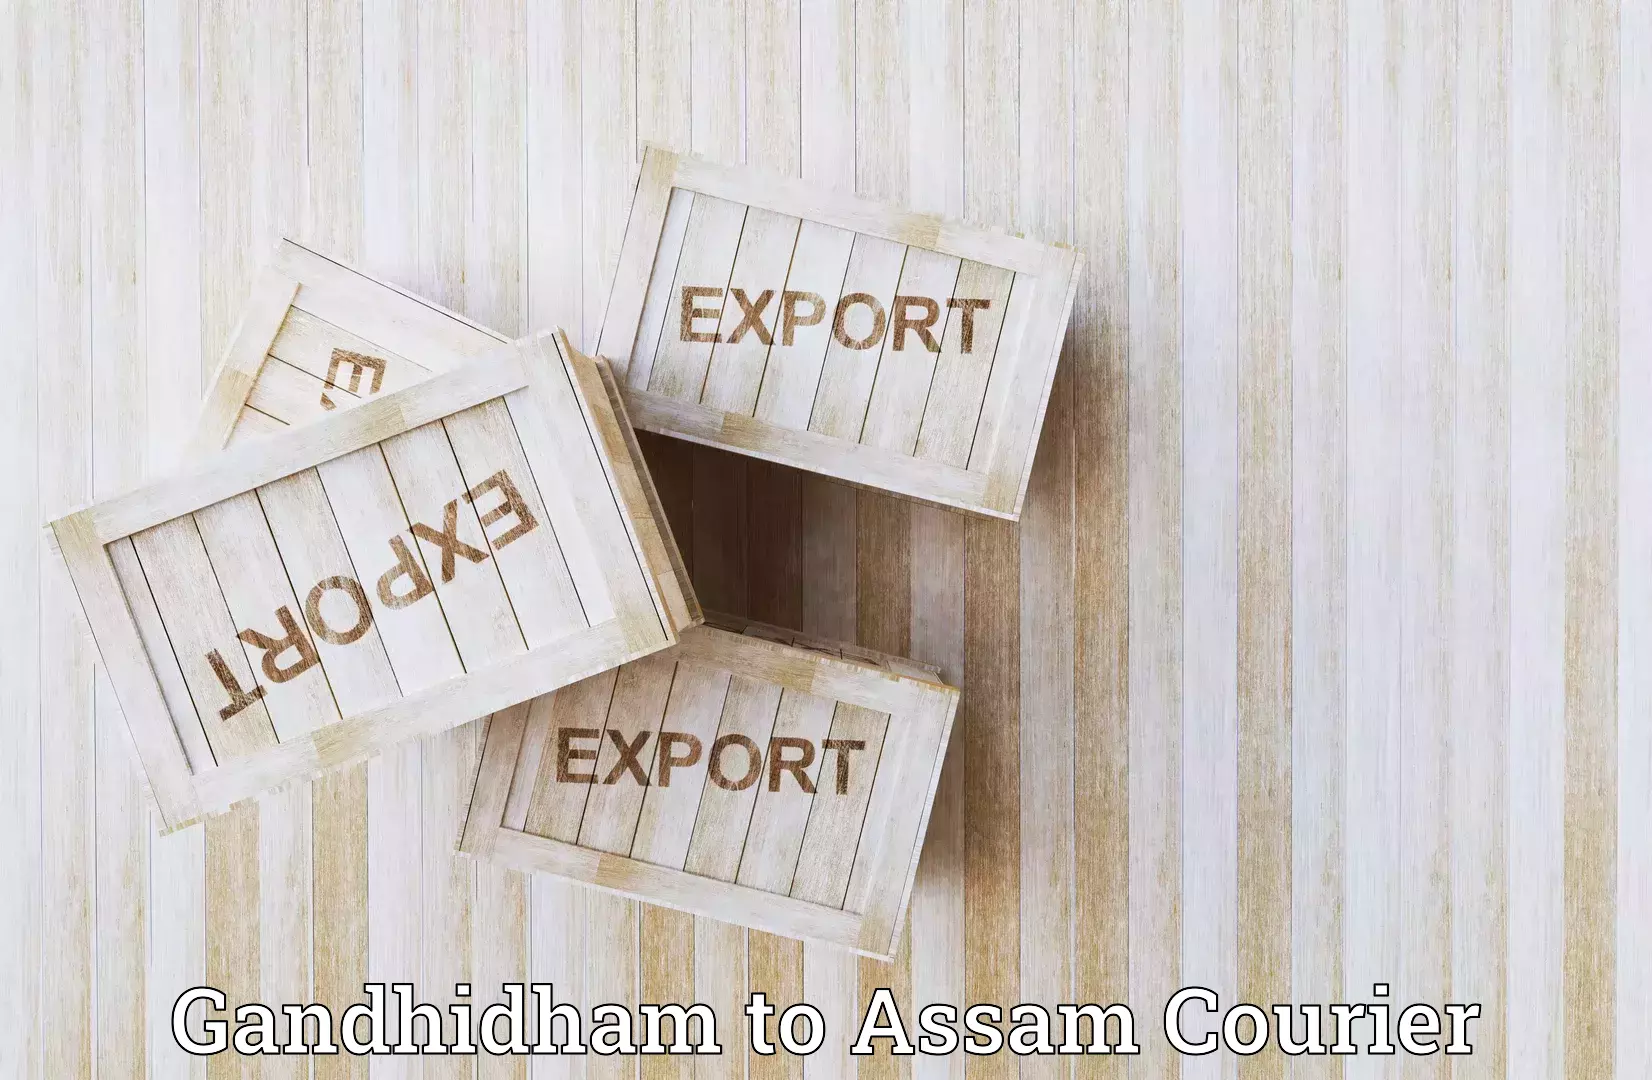 Modern courier technology Gandhidham to Karbi Anglong